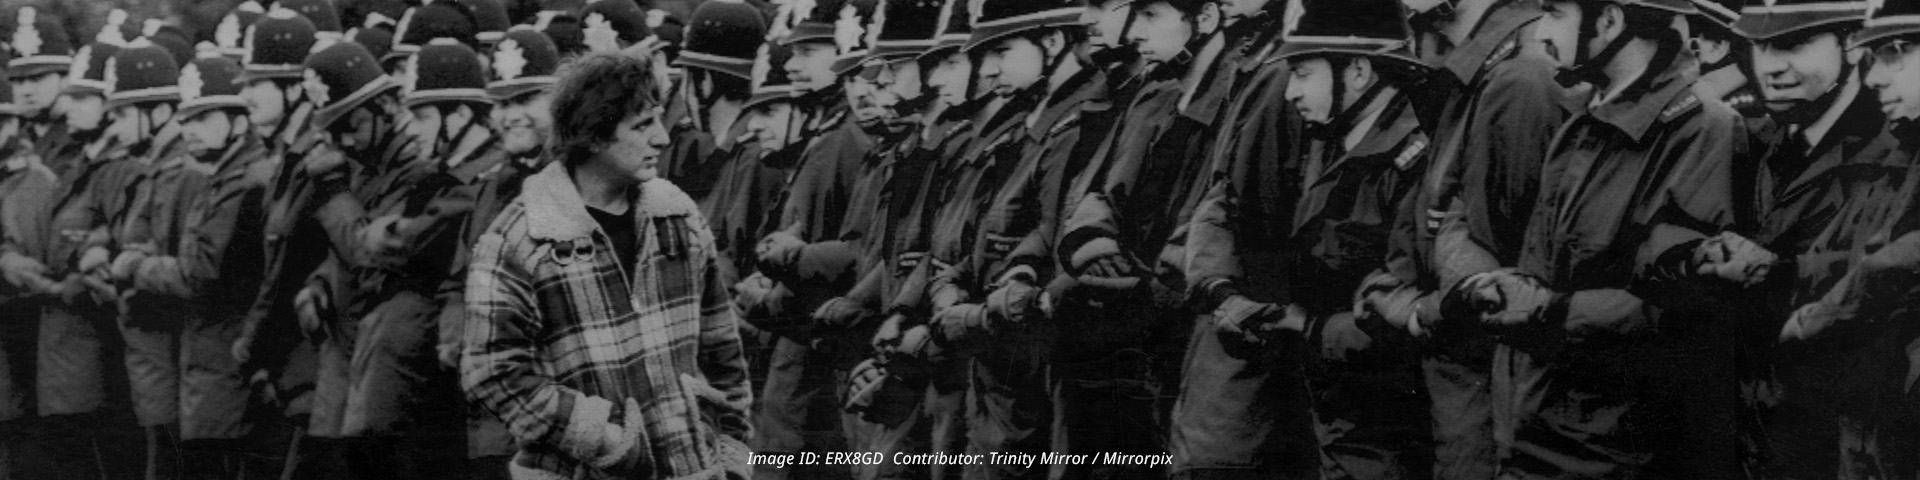 Miners Strike 1984 - 1985 Pictured. Miner Eric Hudson inspects the guard of police officers in the front line at Orgreave coking plant near Sheffield Yorkshire Monday 4th June 1984